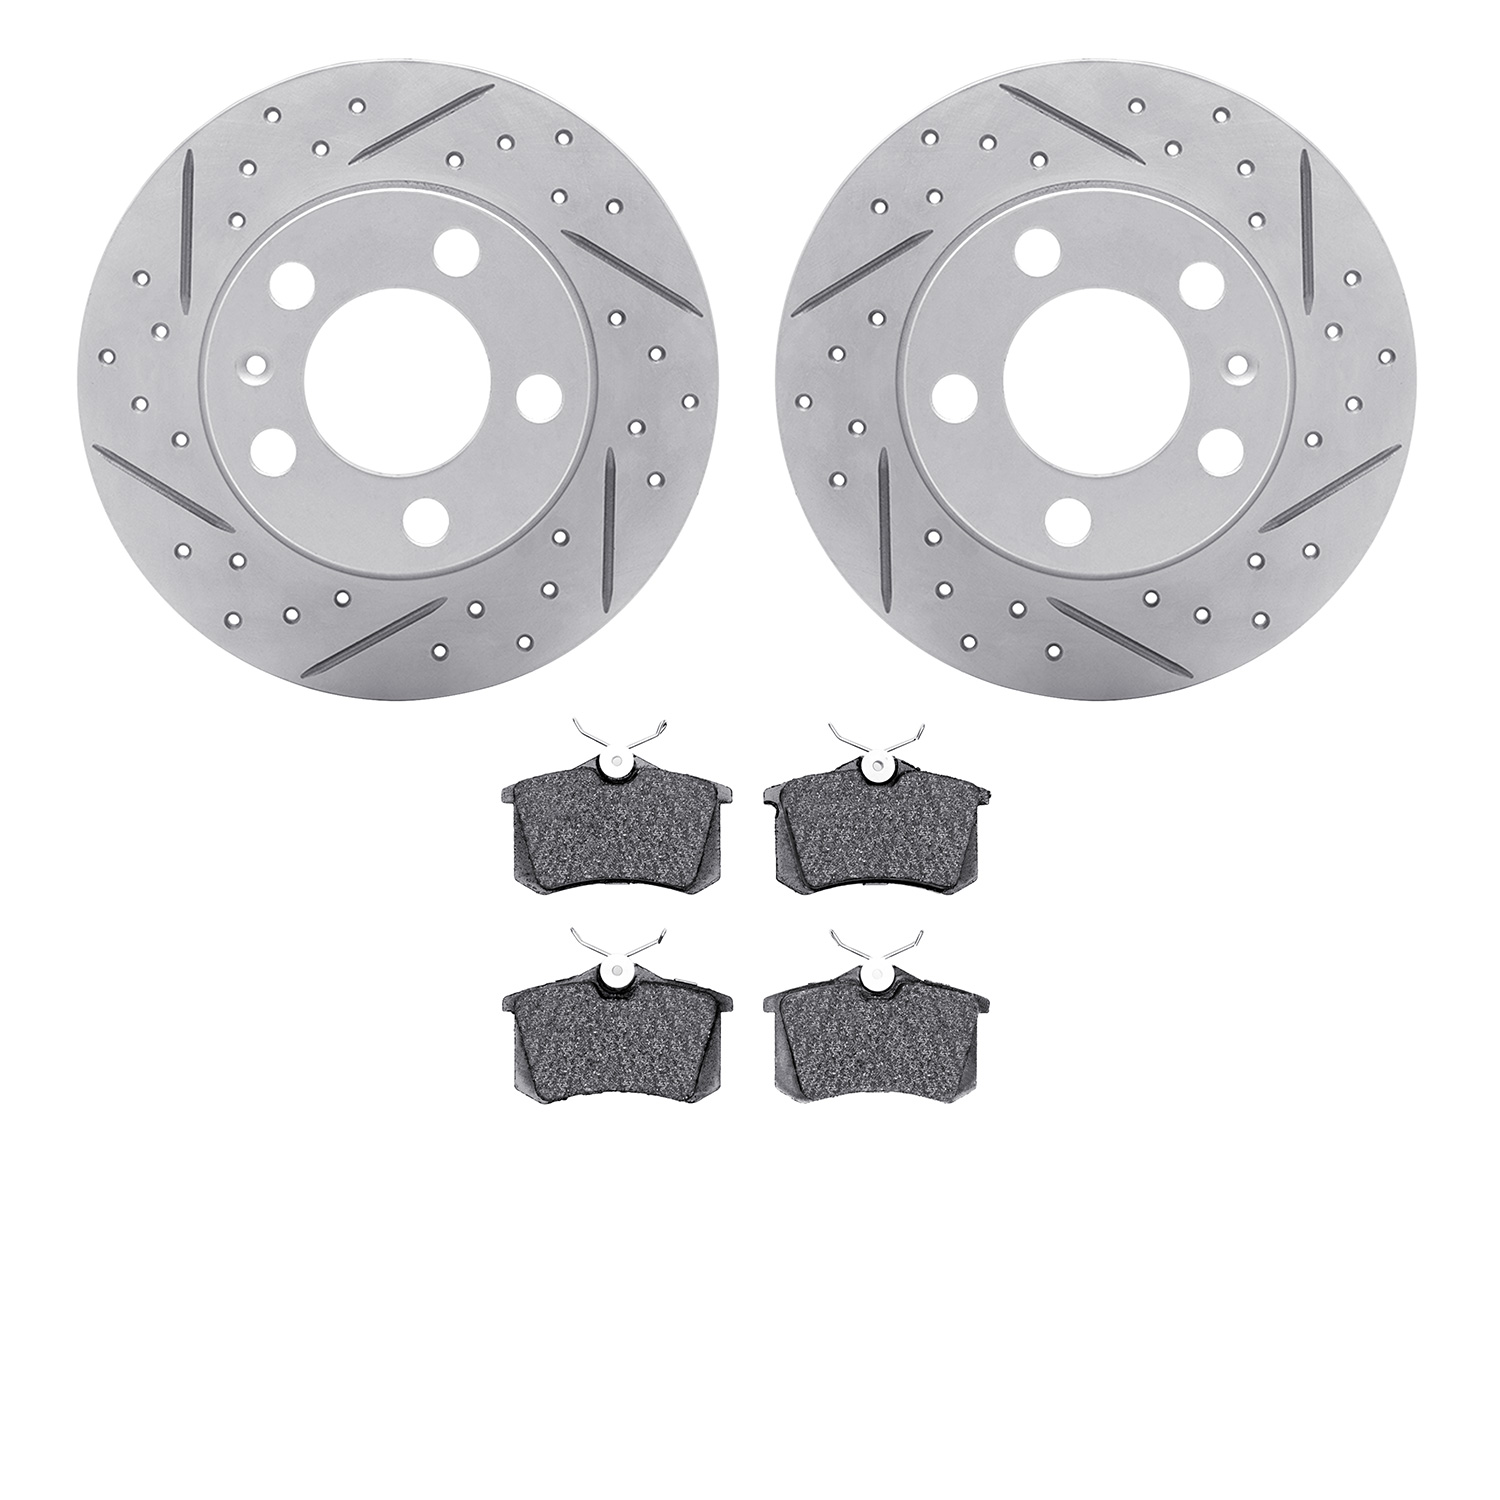 2502-74017 Geoperformance Drilled/Slotted Rotors w/5000 Advanced Brake Pads Kit, 1998-2015 Audi/Volkswagen, Position: Rear